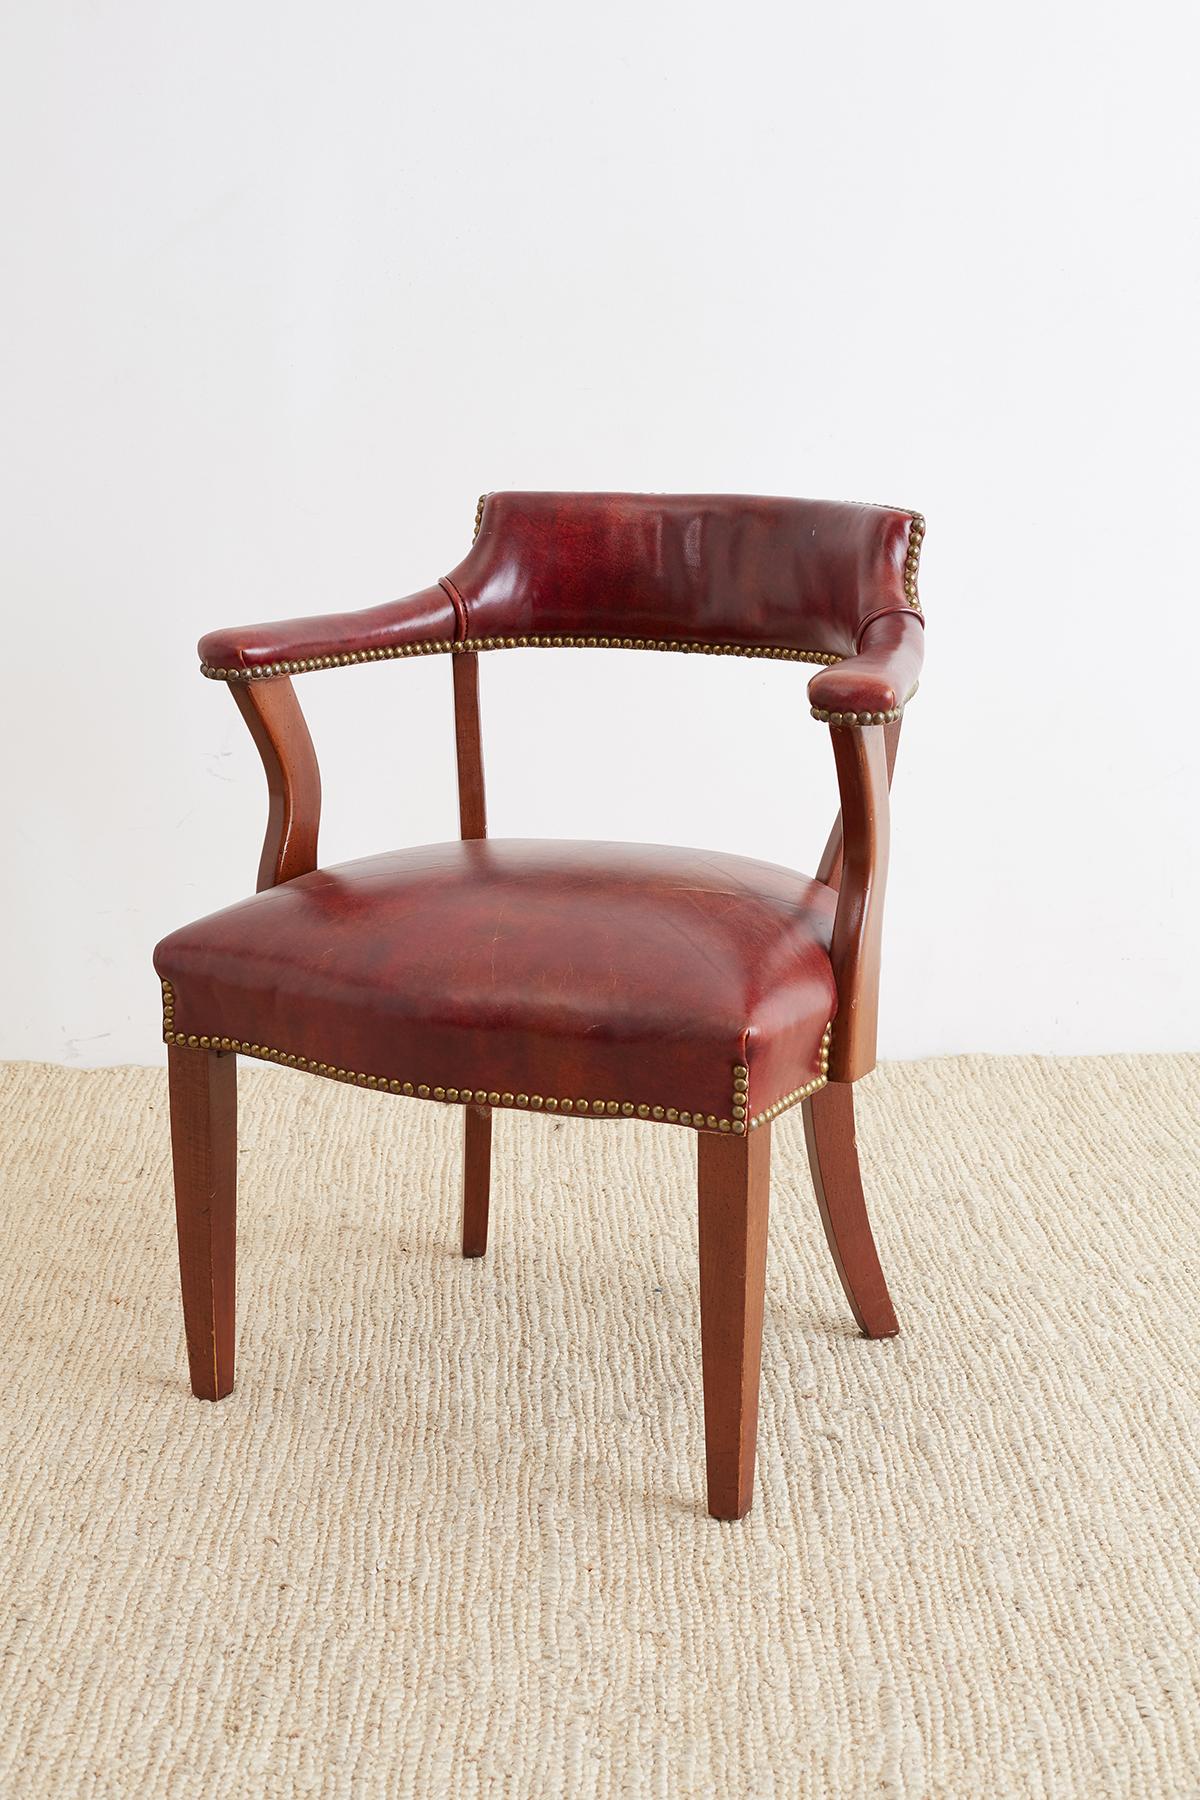 20th Century Pair of English Mahogany and Leather Captains Chairs